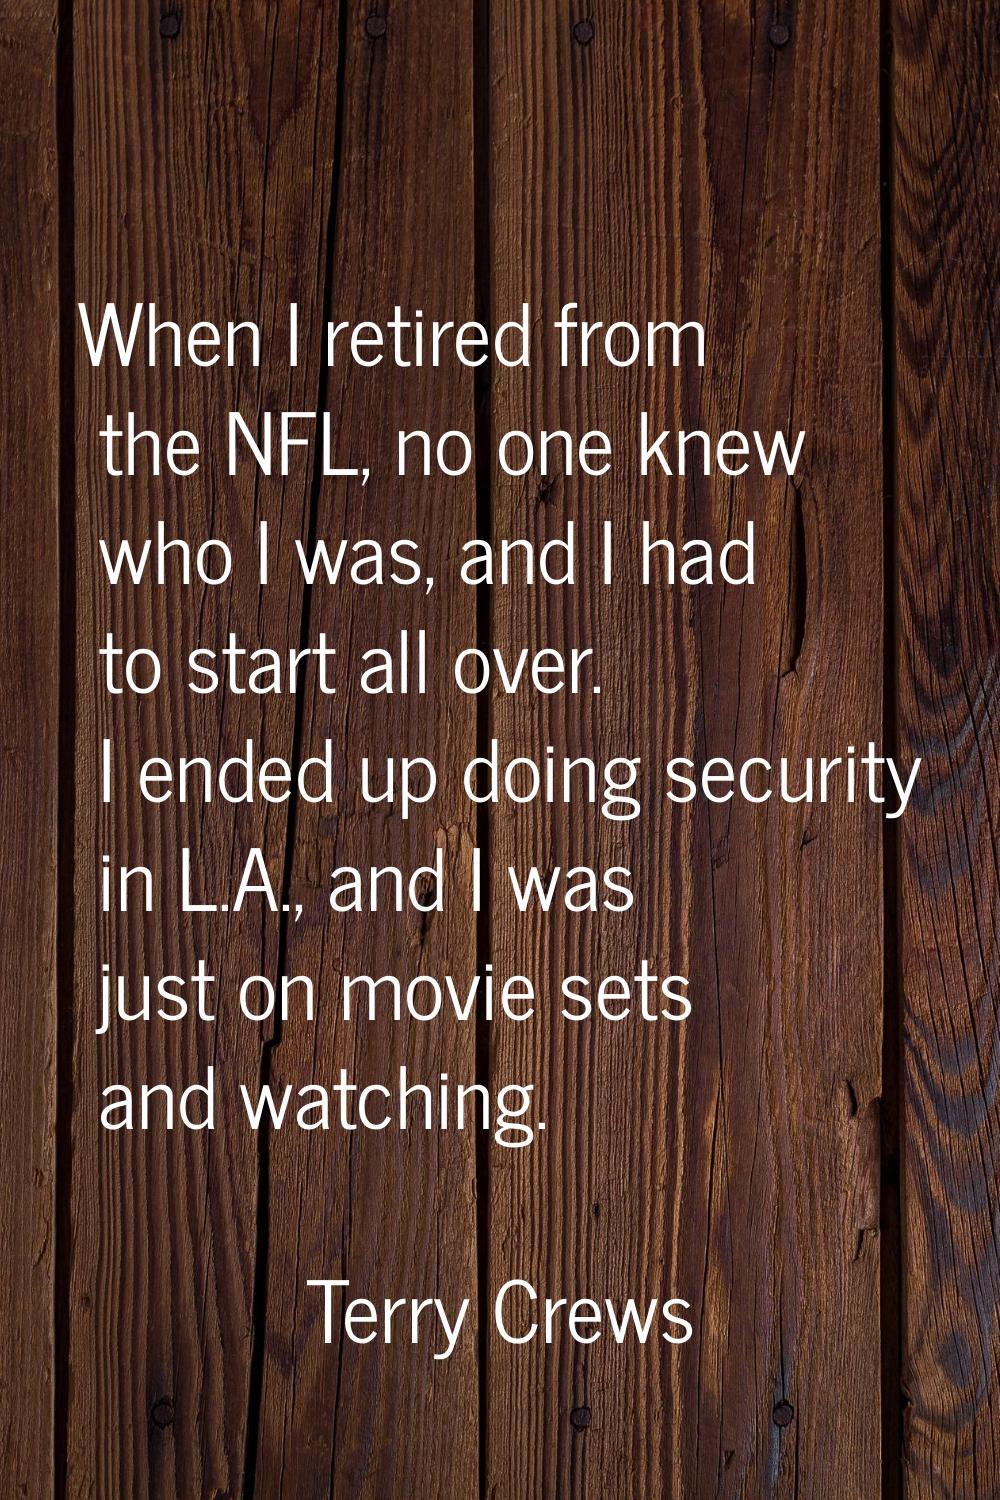 When I retired from the NFL, no one knew who I was, and I had to start all over. I ended up doing s